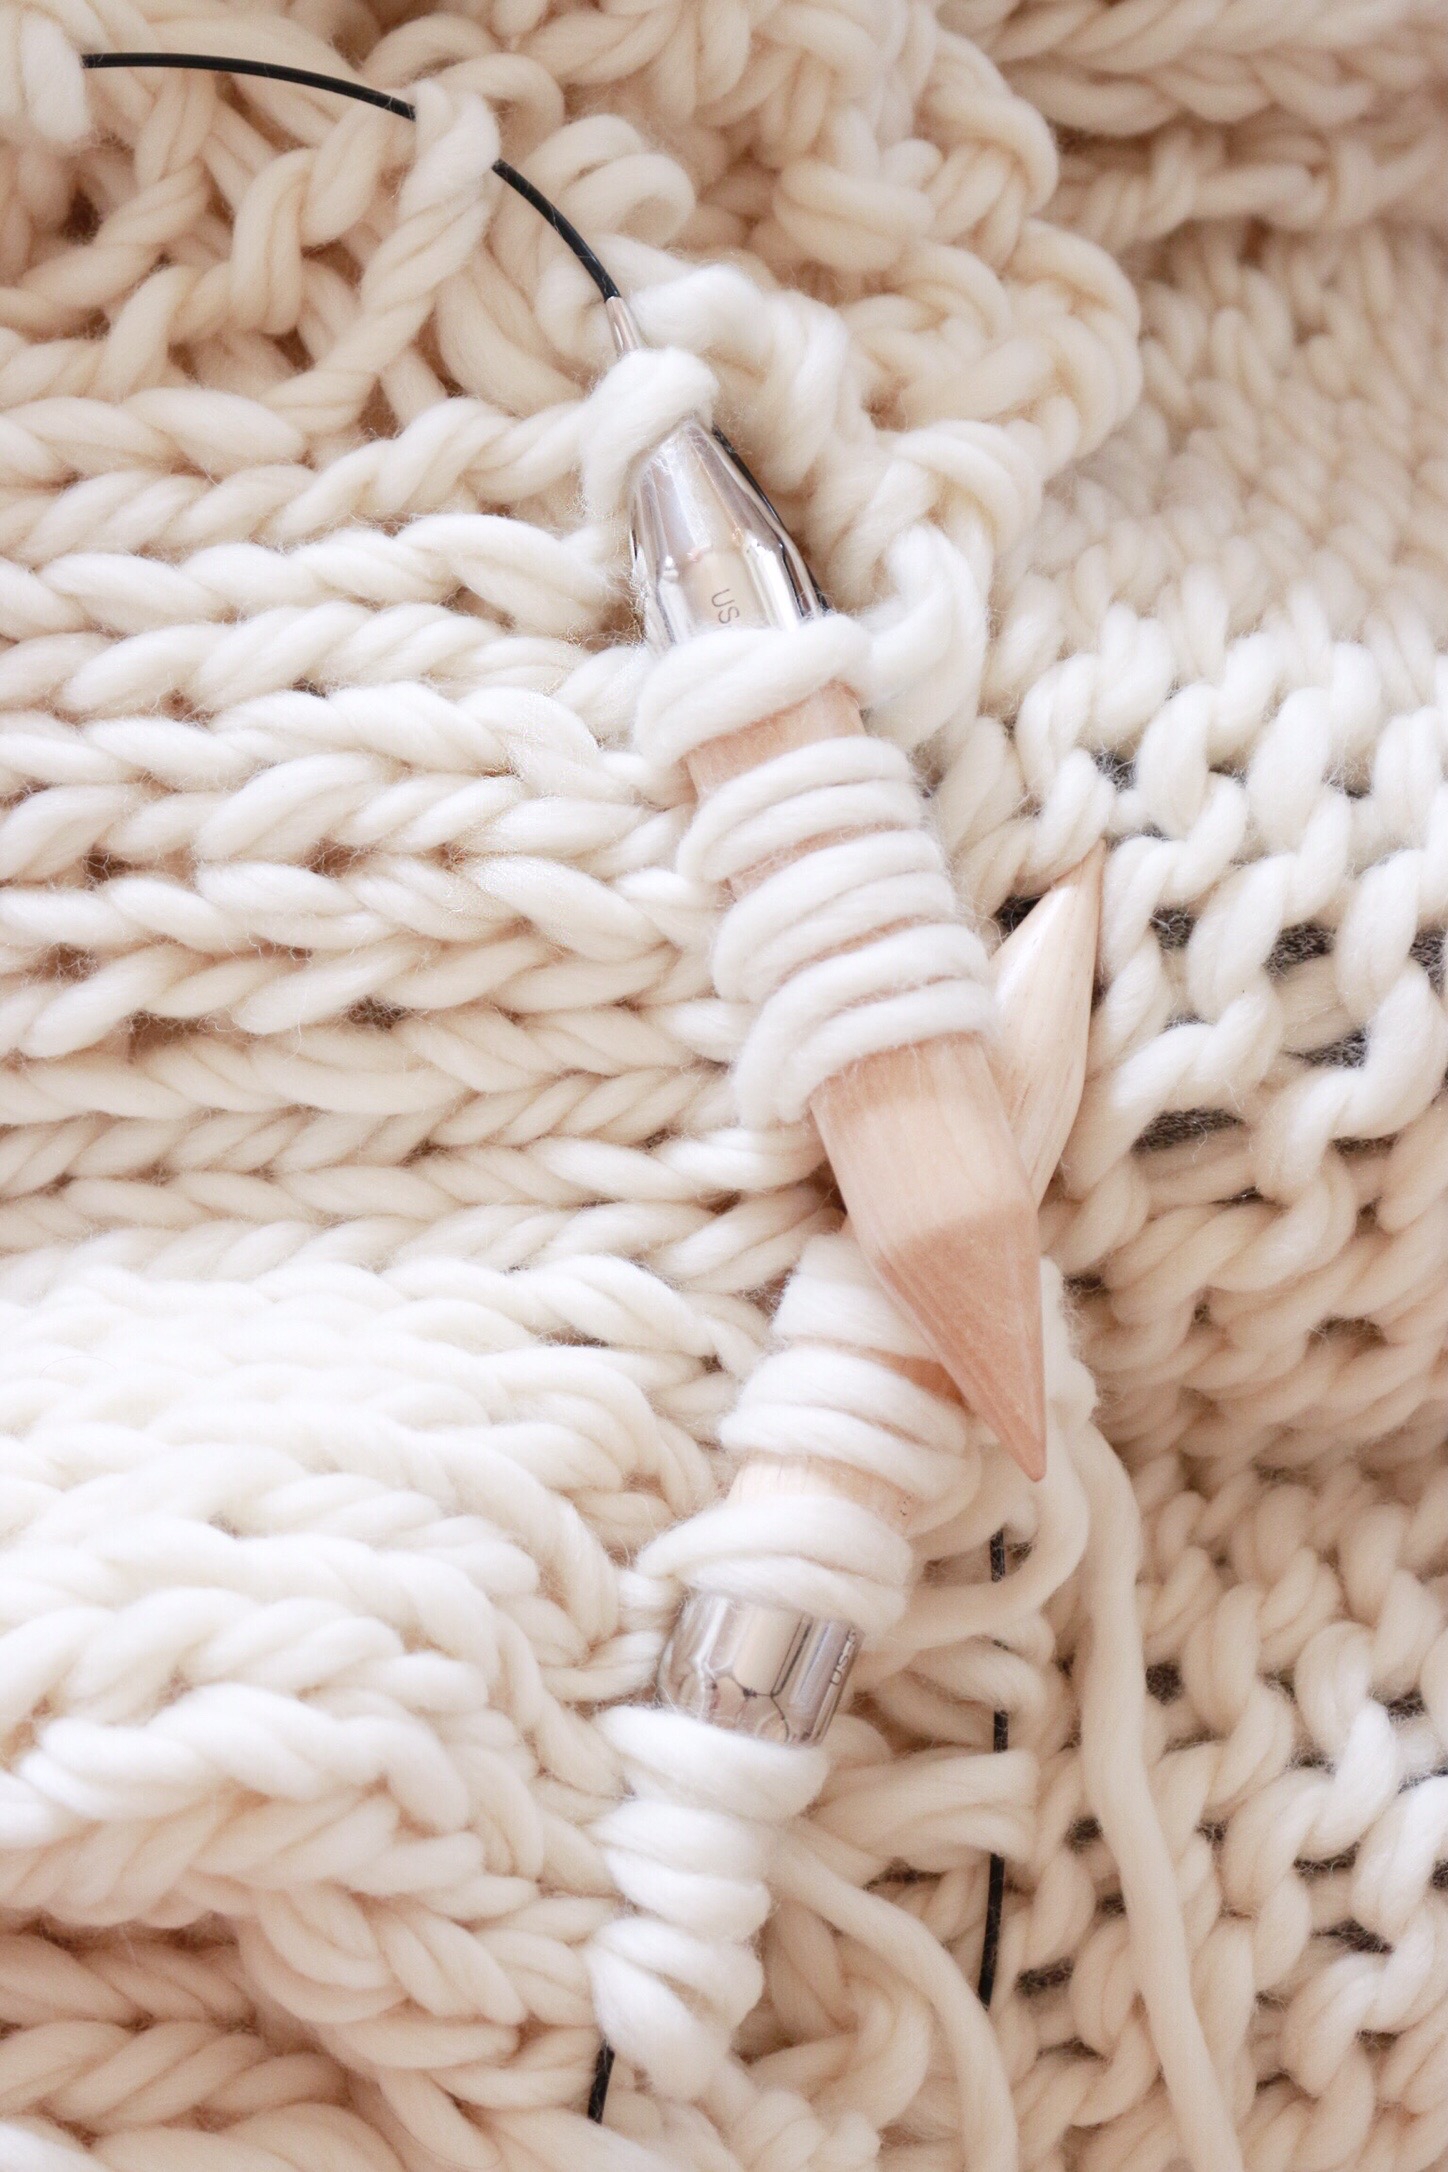 How to knit a Chunky Wool Blanket { Free downloadable ...